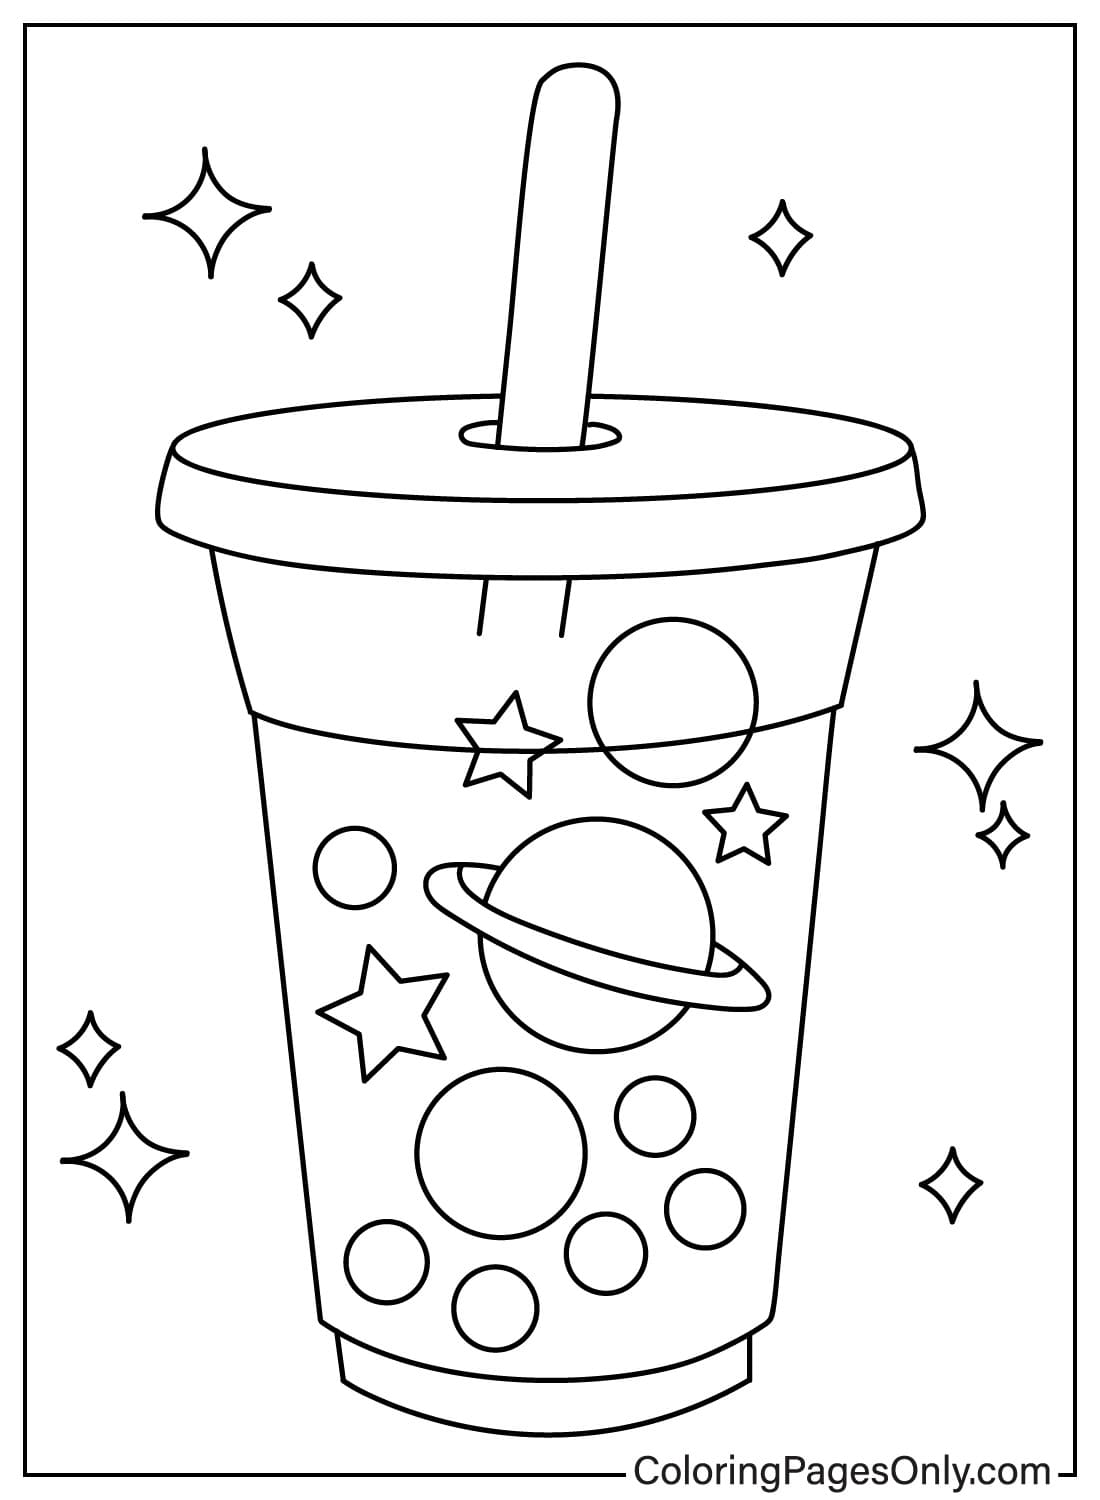 Kawaii Bubble Tea in Space by Boba TeaMe - Free Printable Coloring Pages